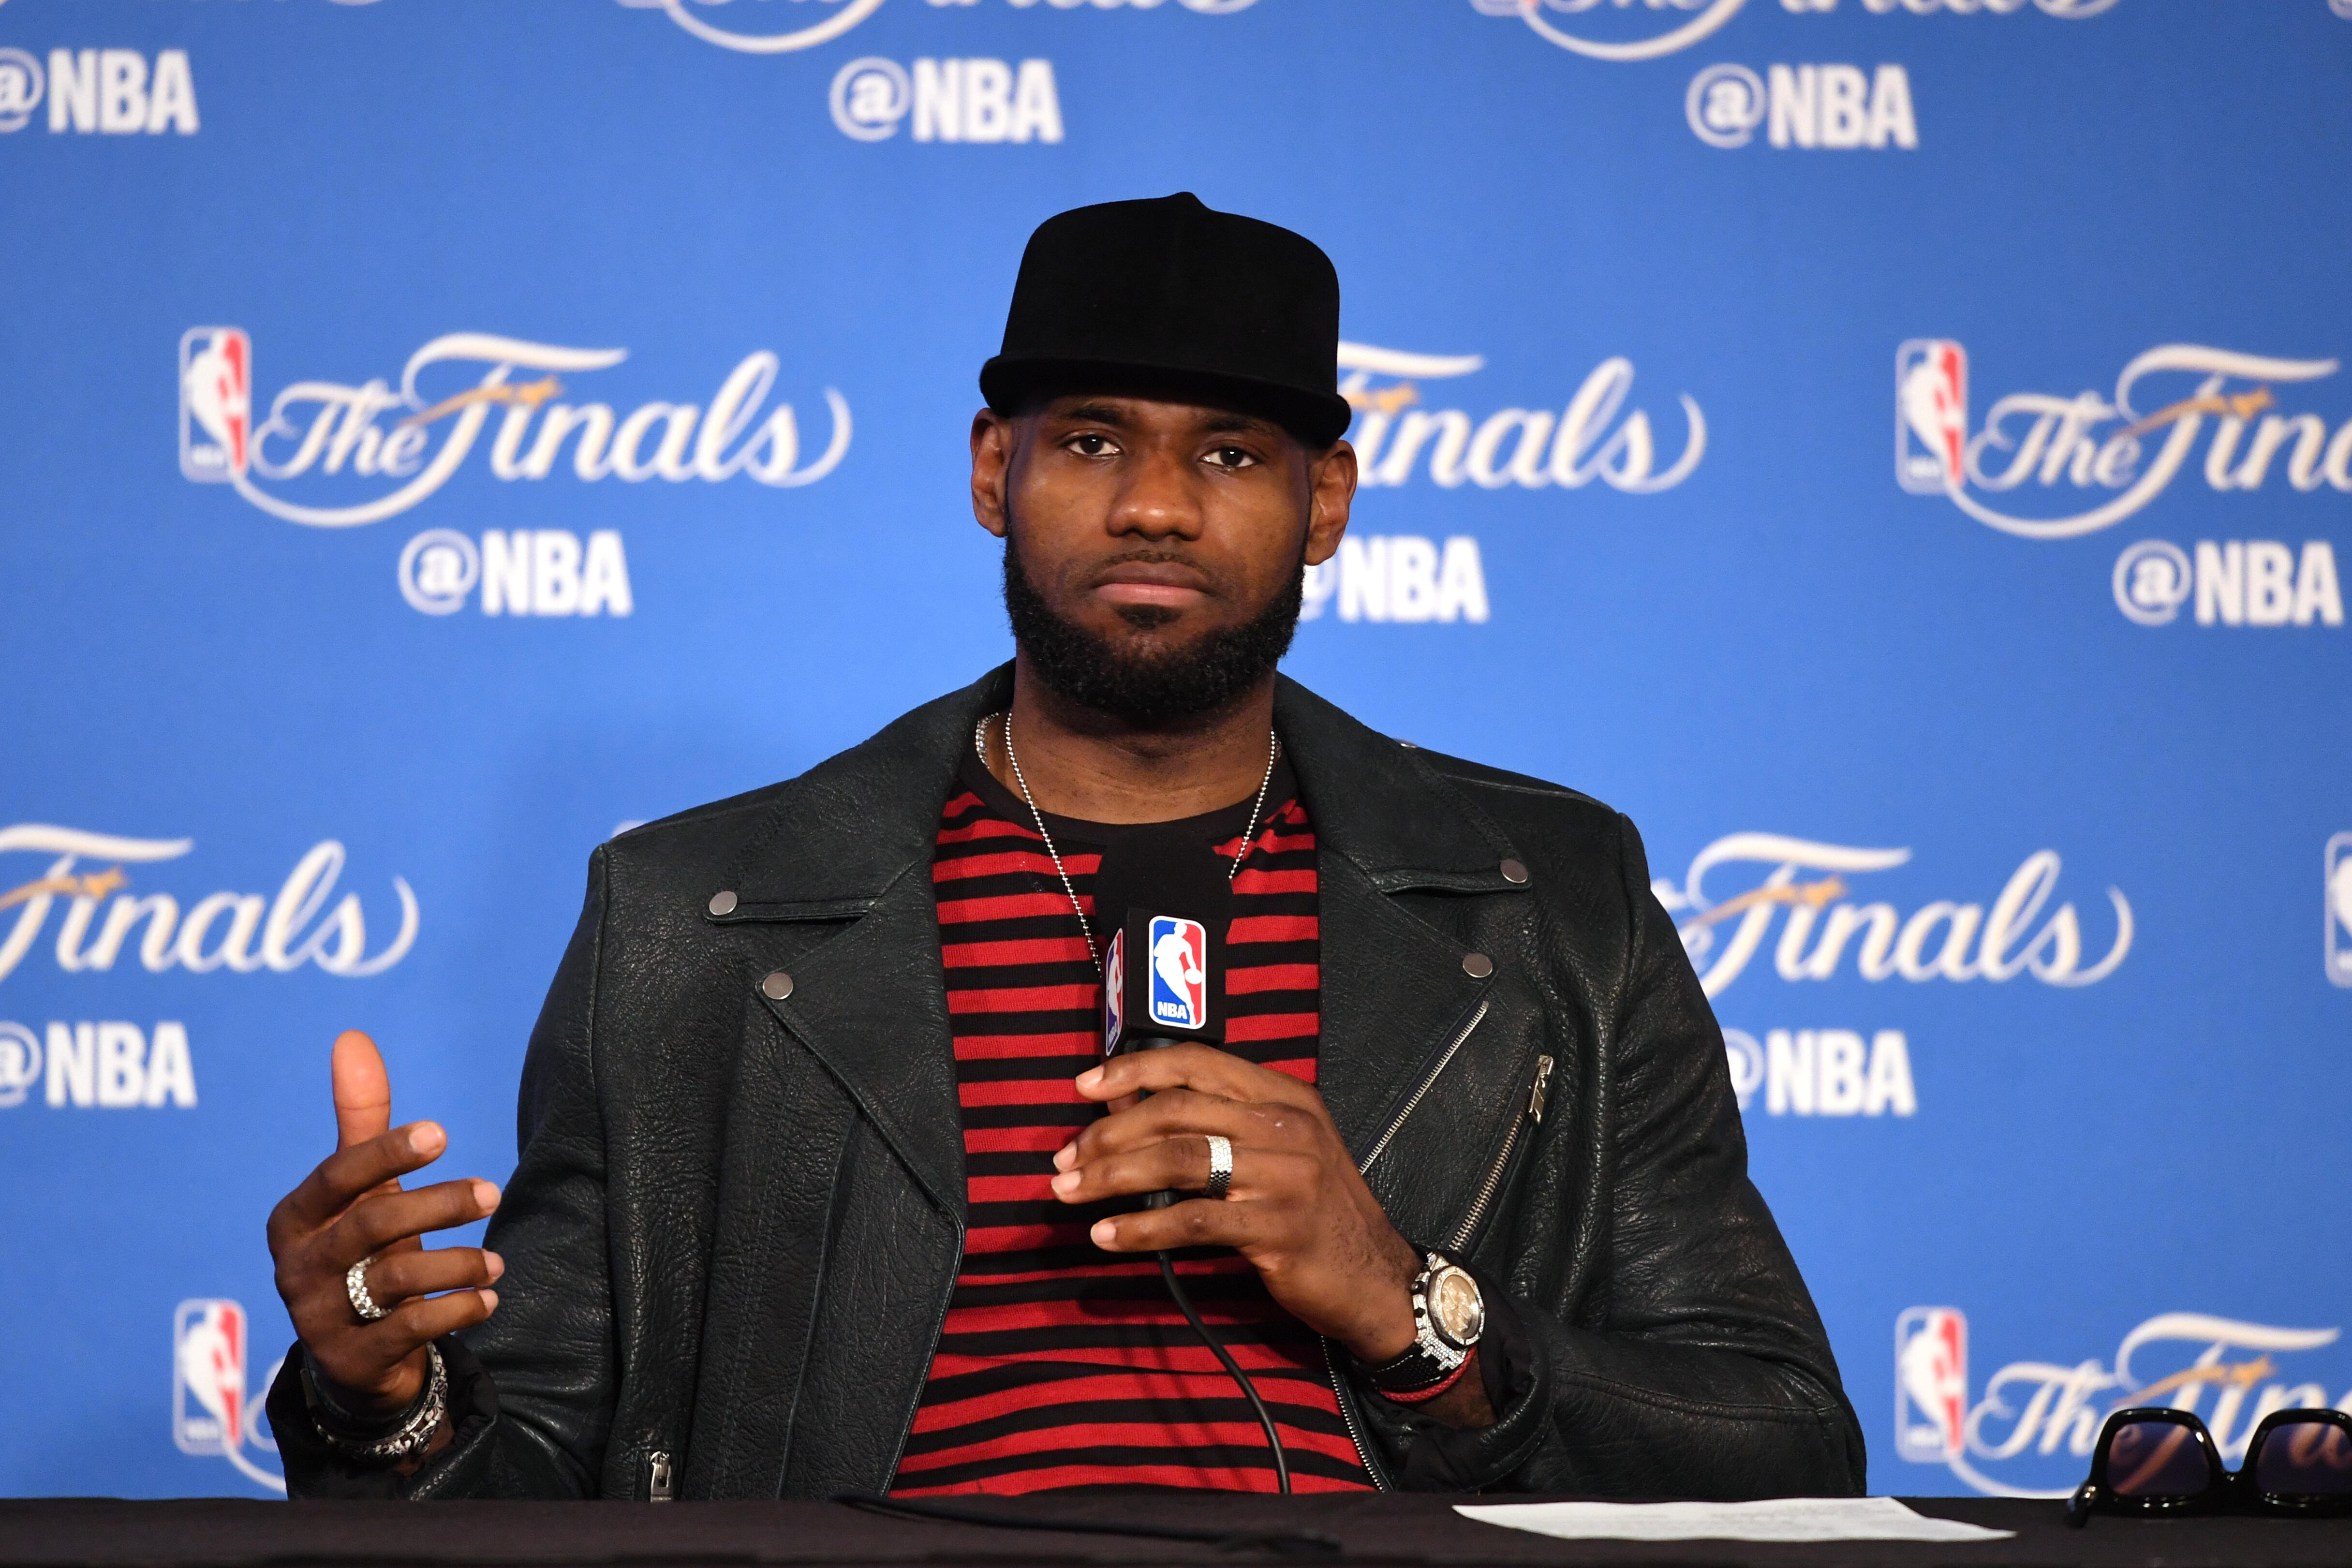 LeBron James Called Donald Trump A 'Bum' For Calling Out Steph Curry